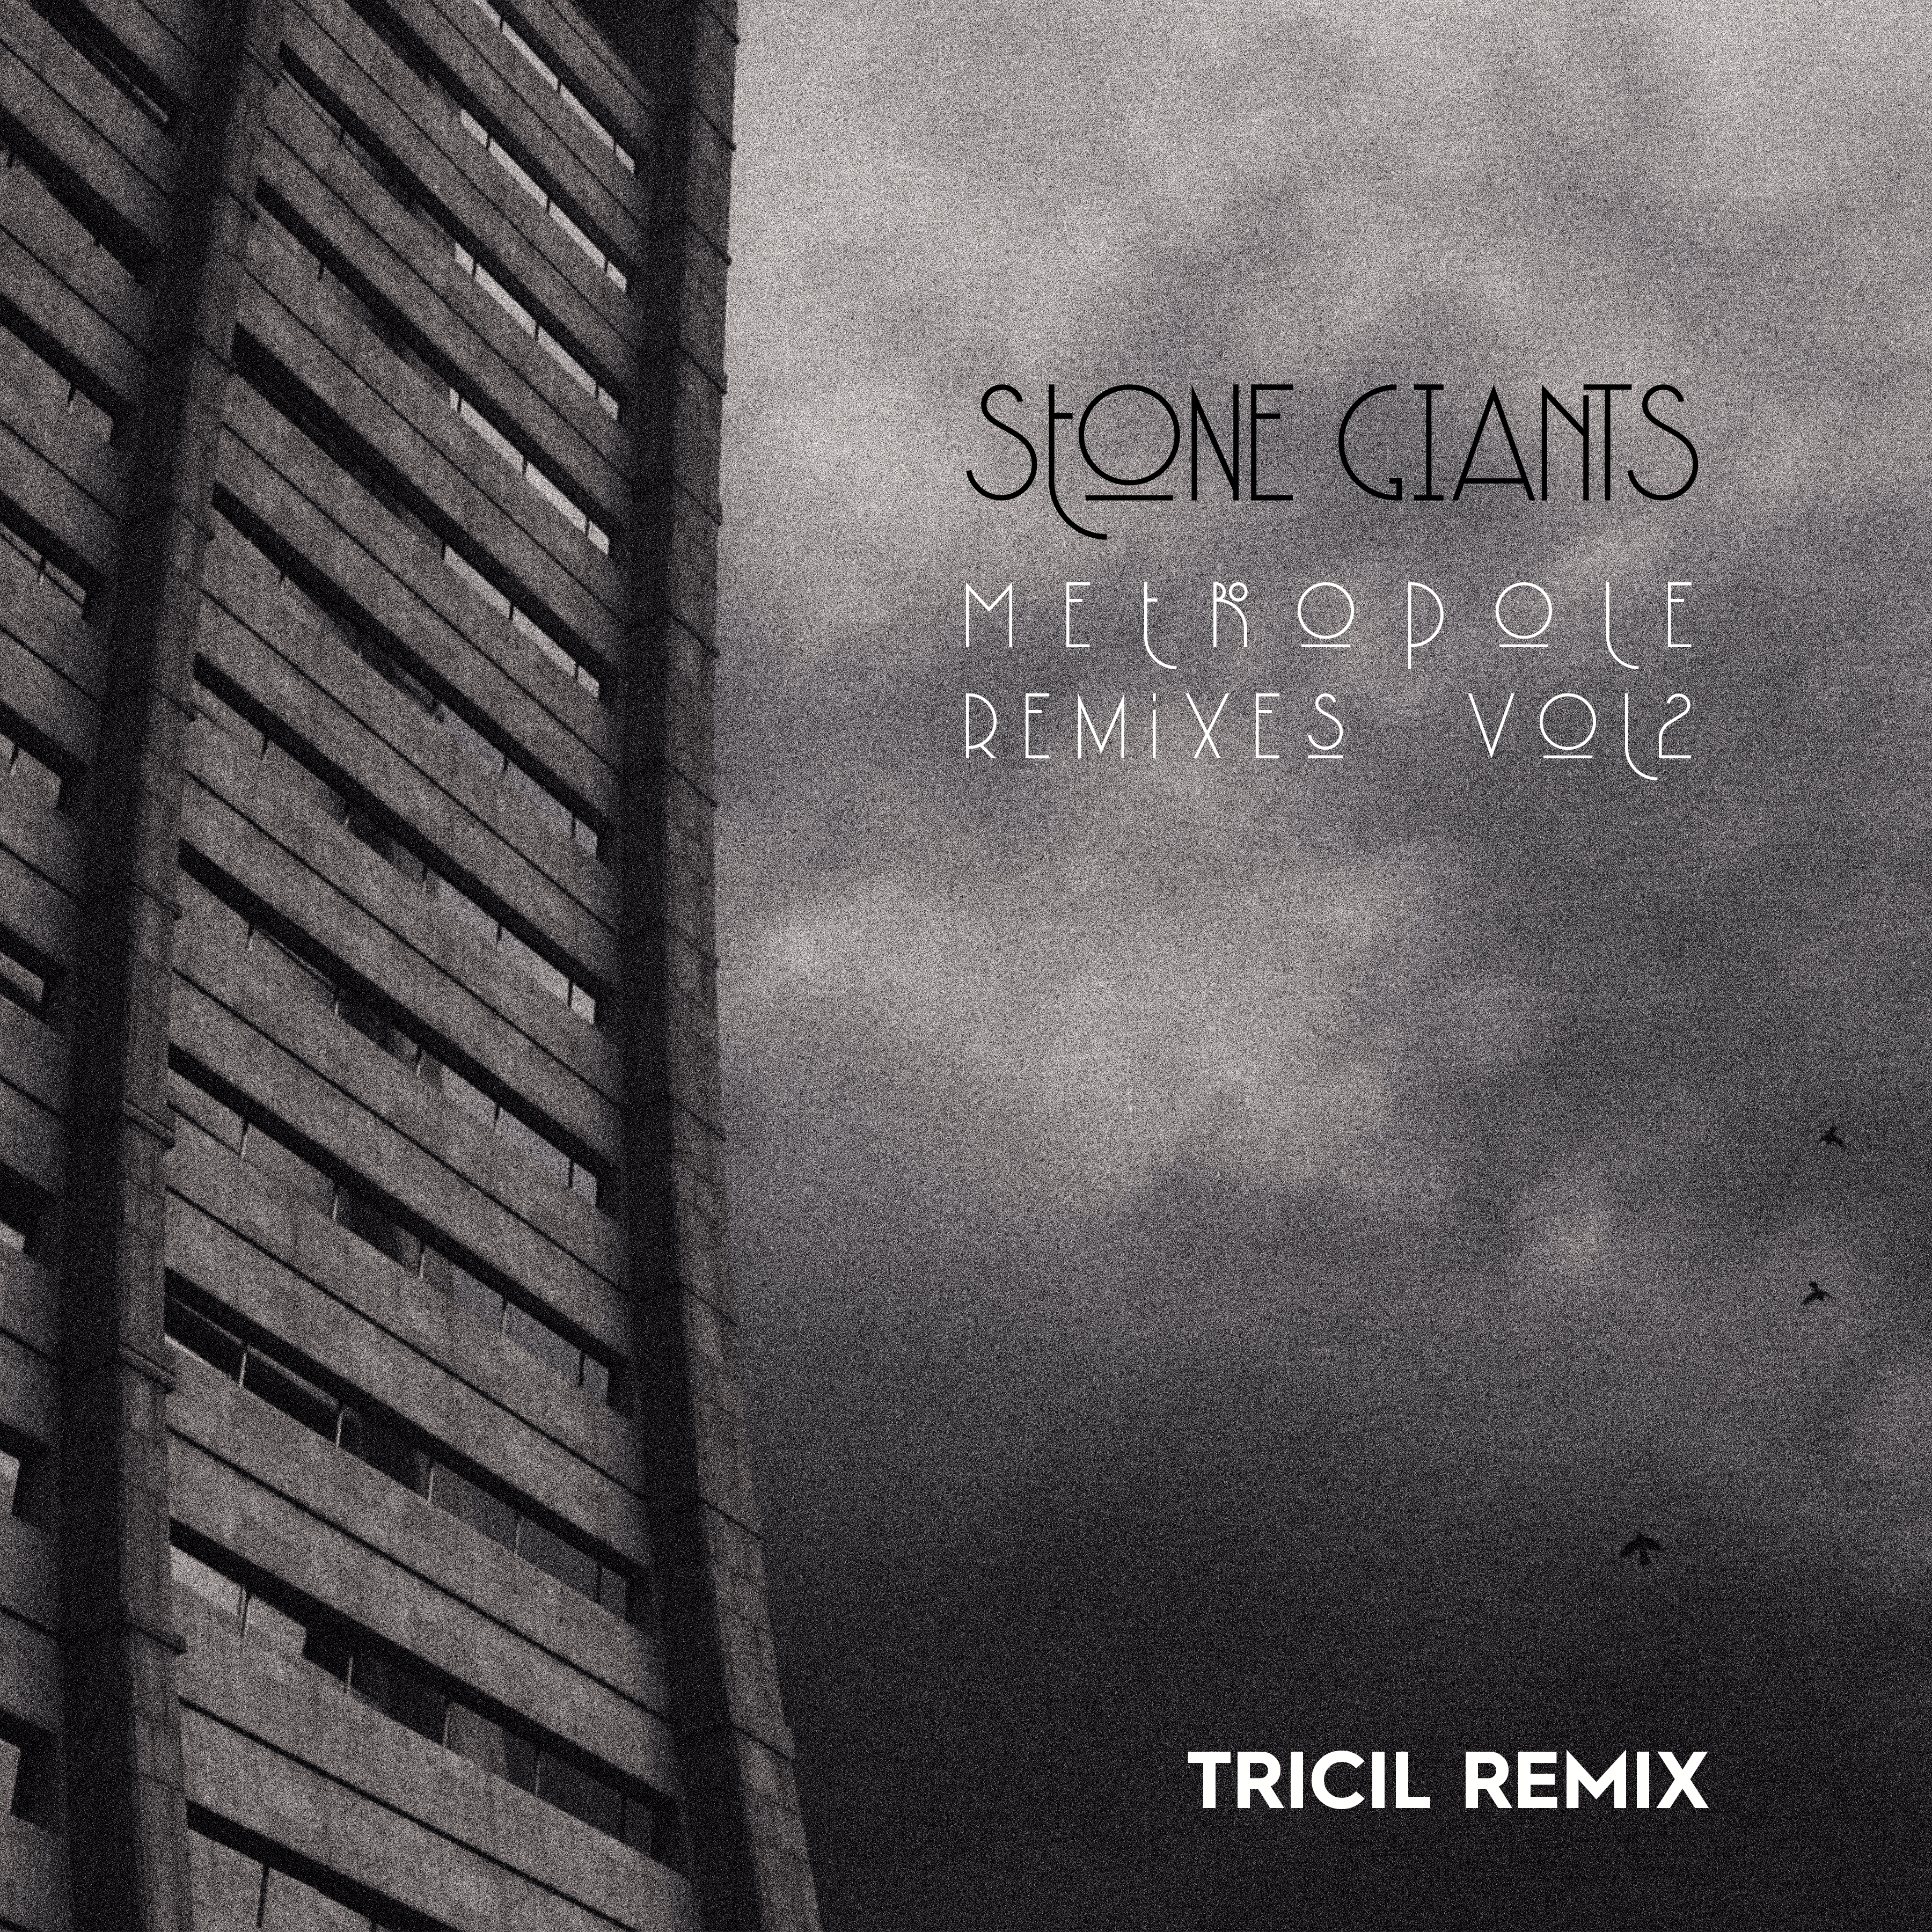 Cover art for Amon Tobin's song: stone giants: metropole (tricil remix)